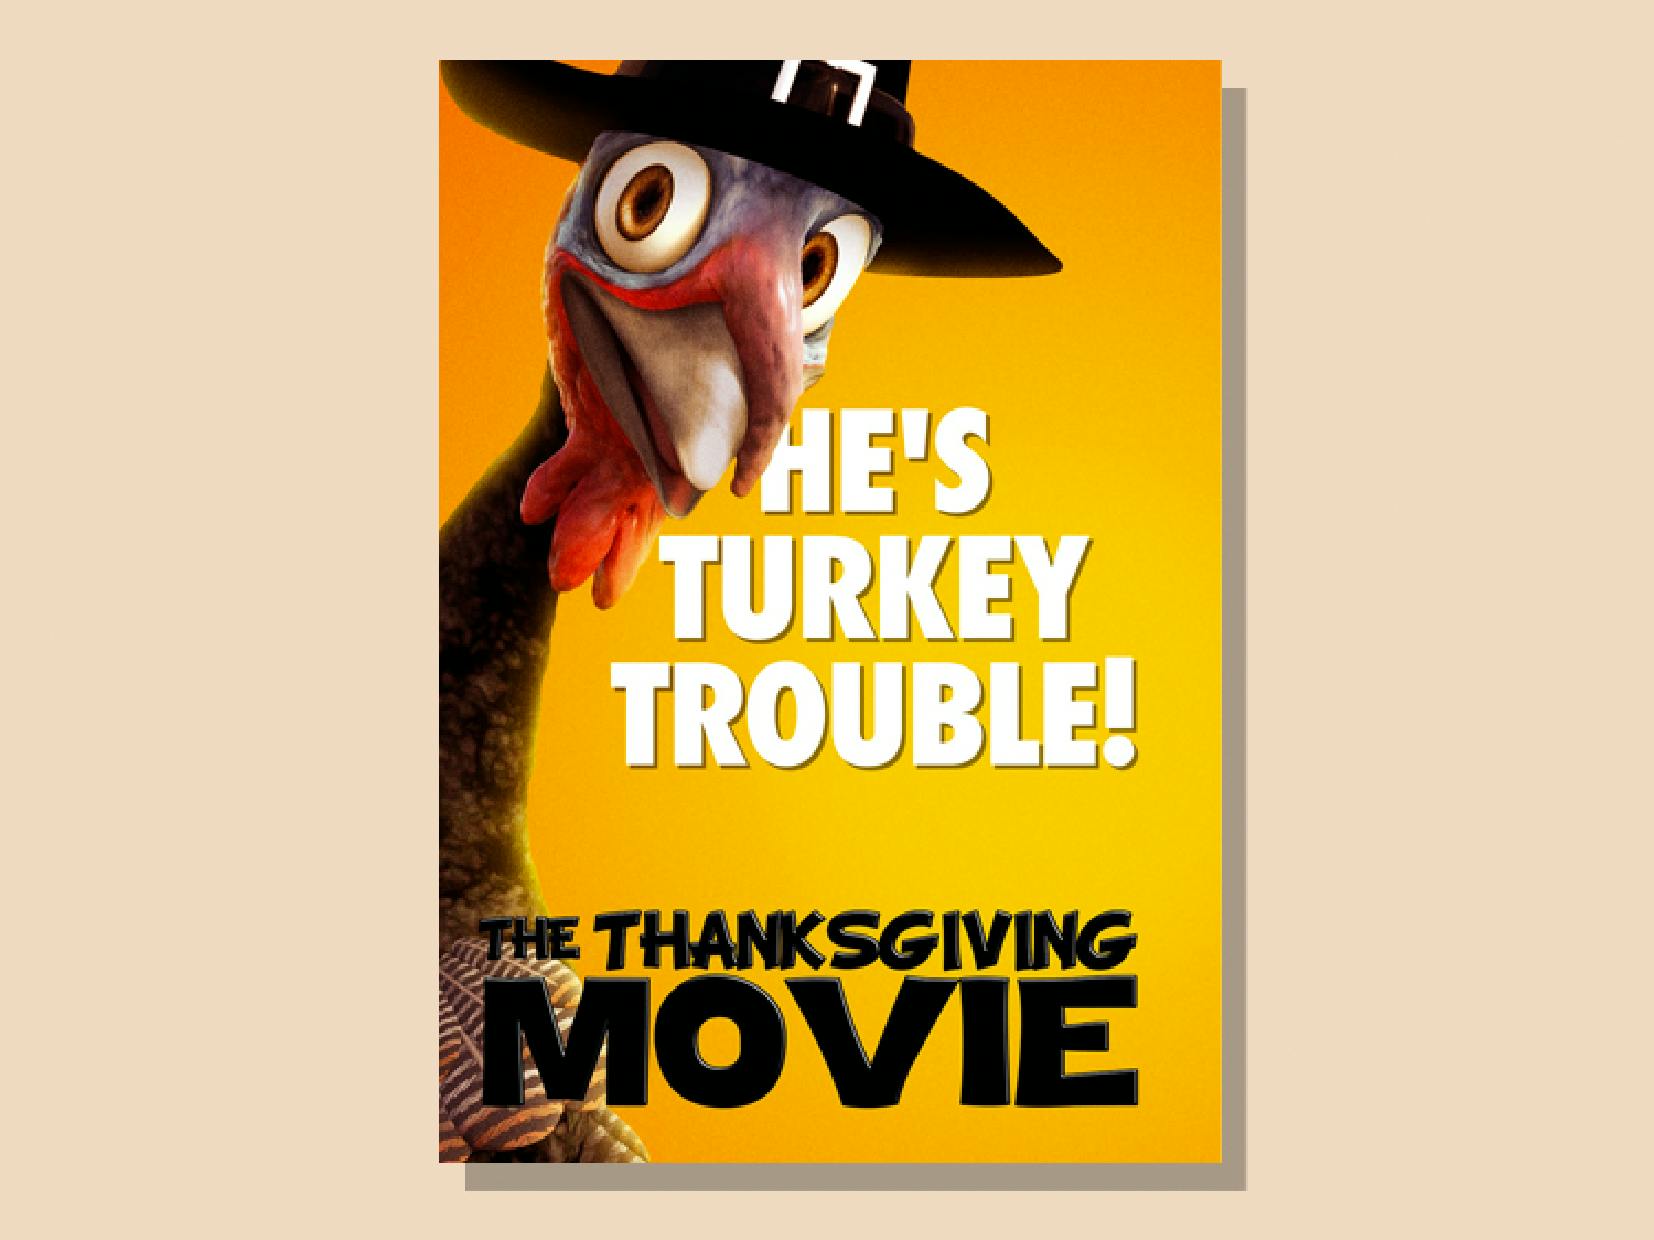 The Thanksgiving Movie, one of the best kids thanksgiving movies